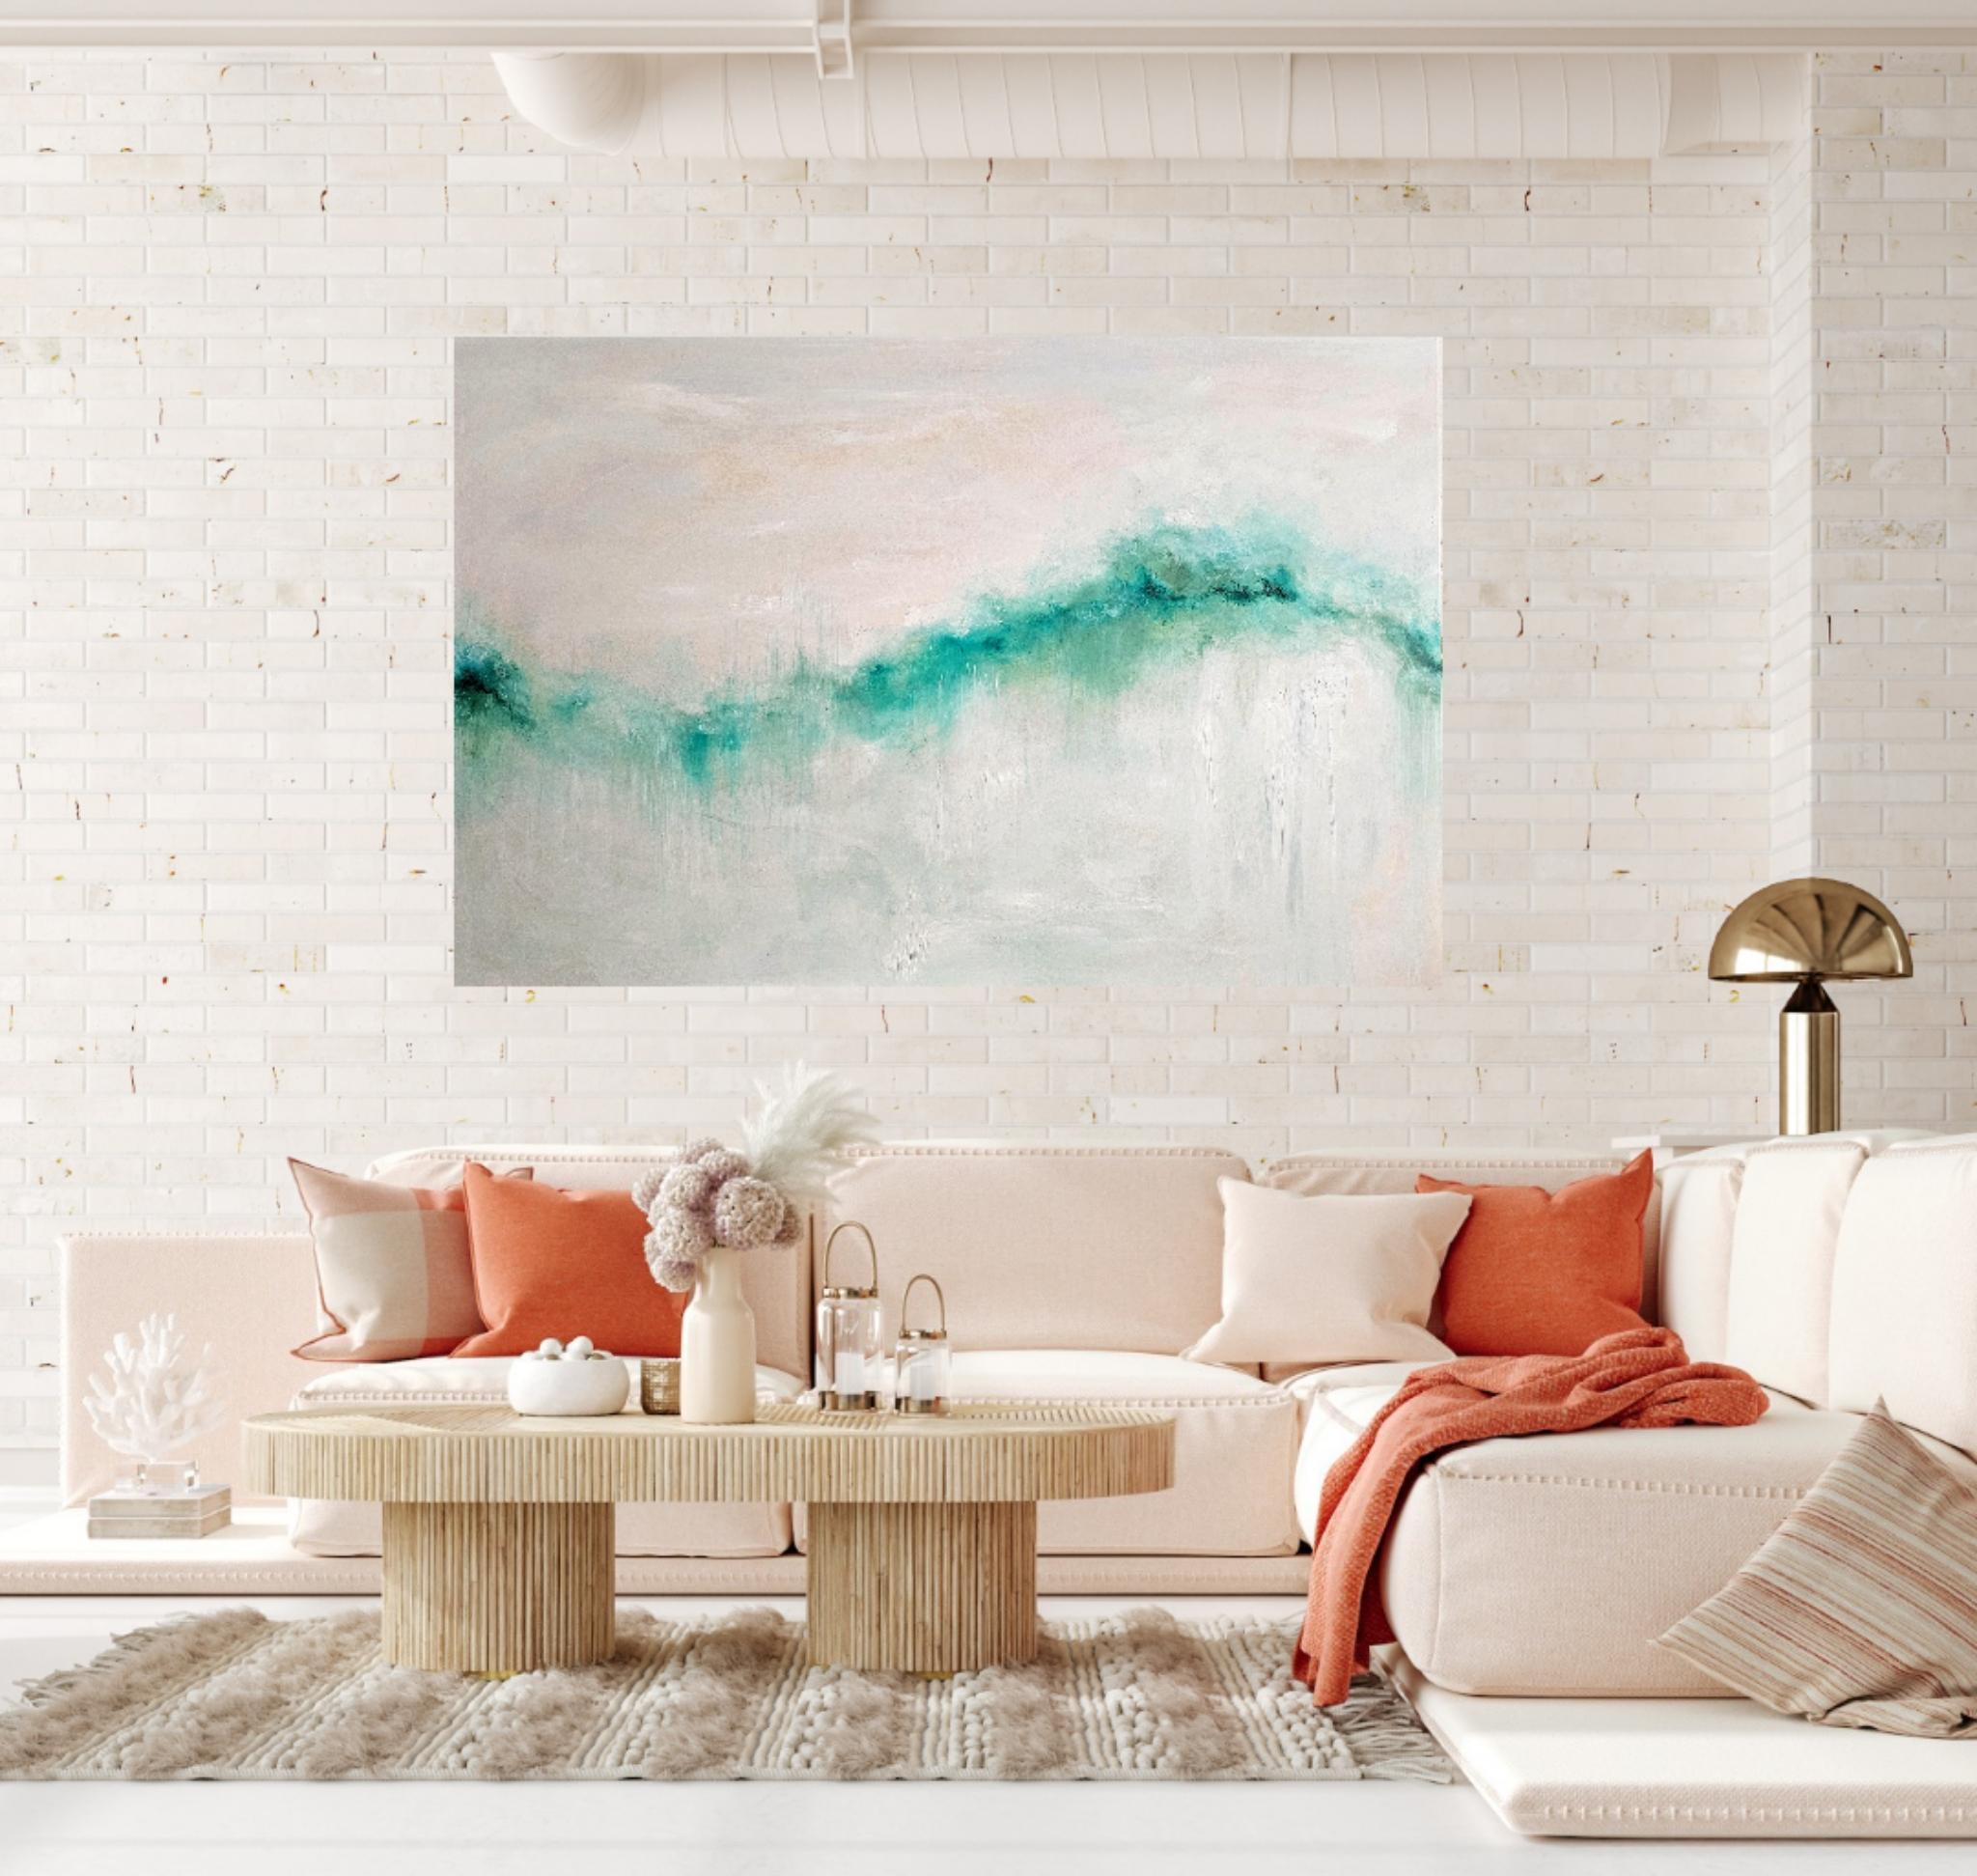 I dreamt of the sea - Large abstract seascape painting - Abstract Expressionist Painting by Jennifer L. Baker